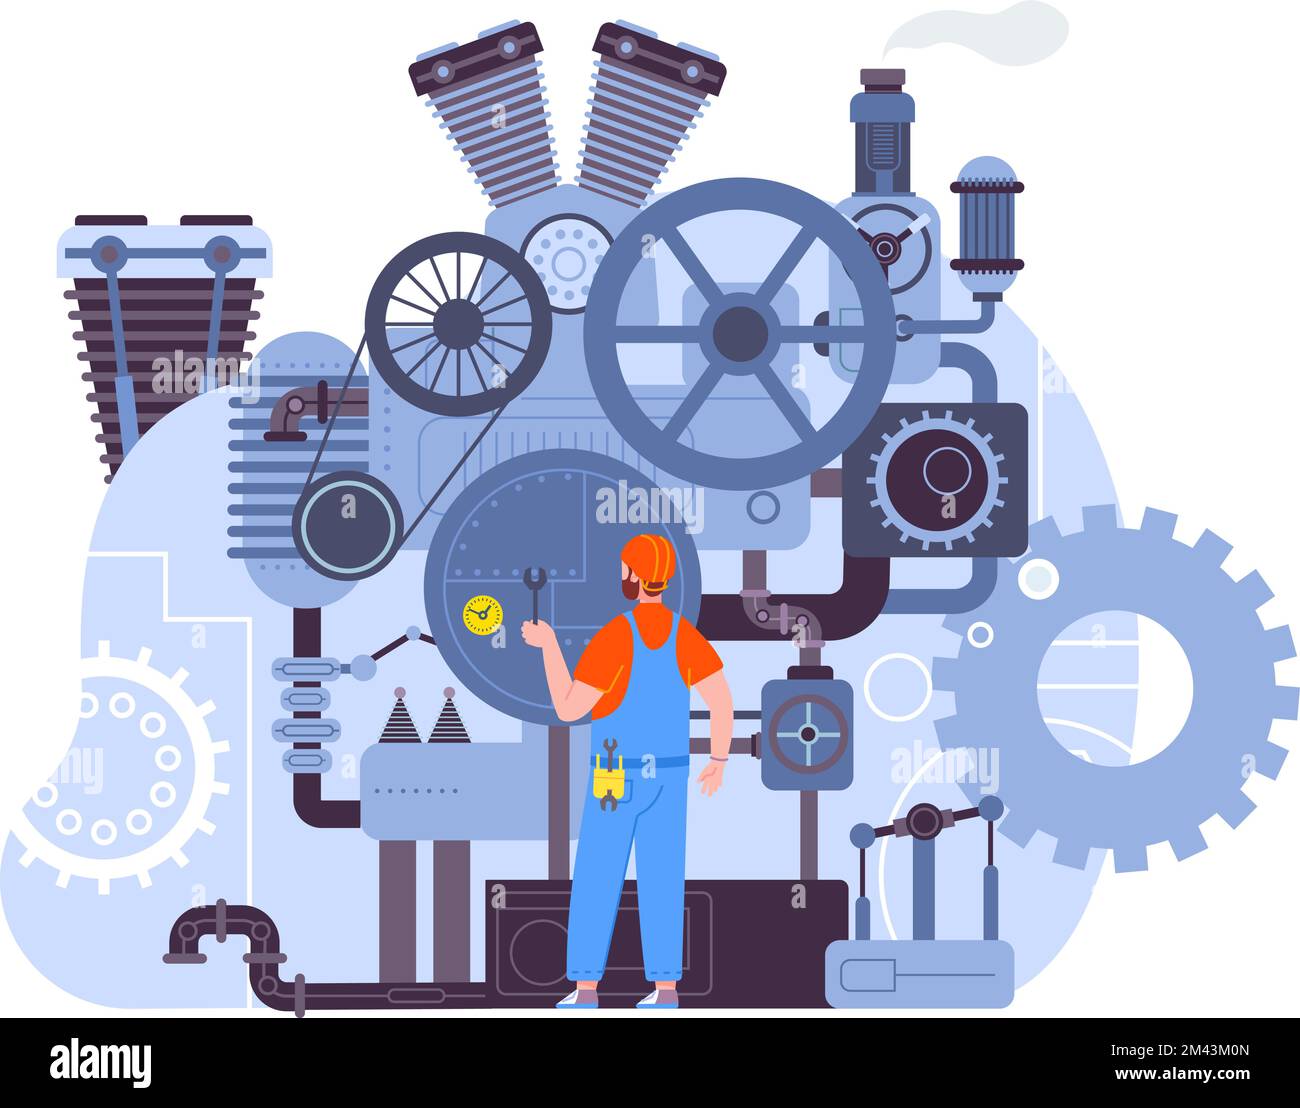 Retro machines assembly. Man assembling steam energy machine, antique industrial factory workflow, history time device manufacturing valve funnel pipe vector illustration of internal combustion engine Stock Vector